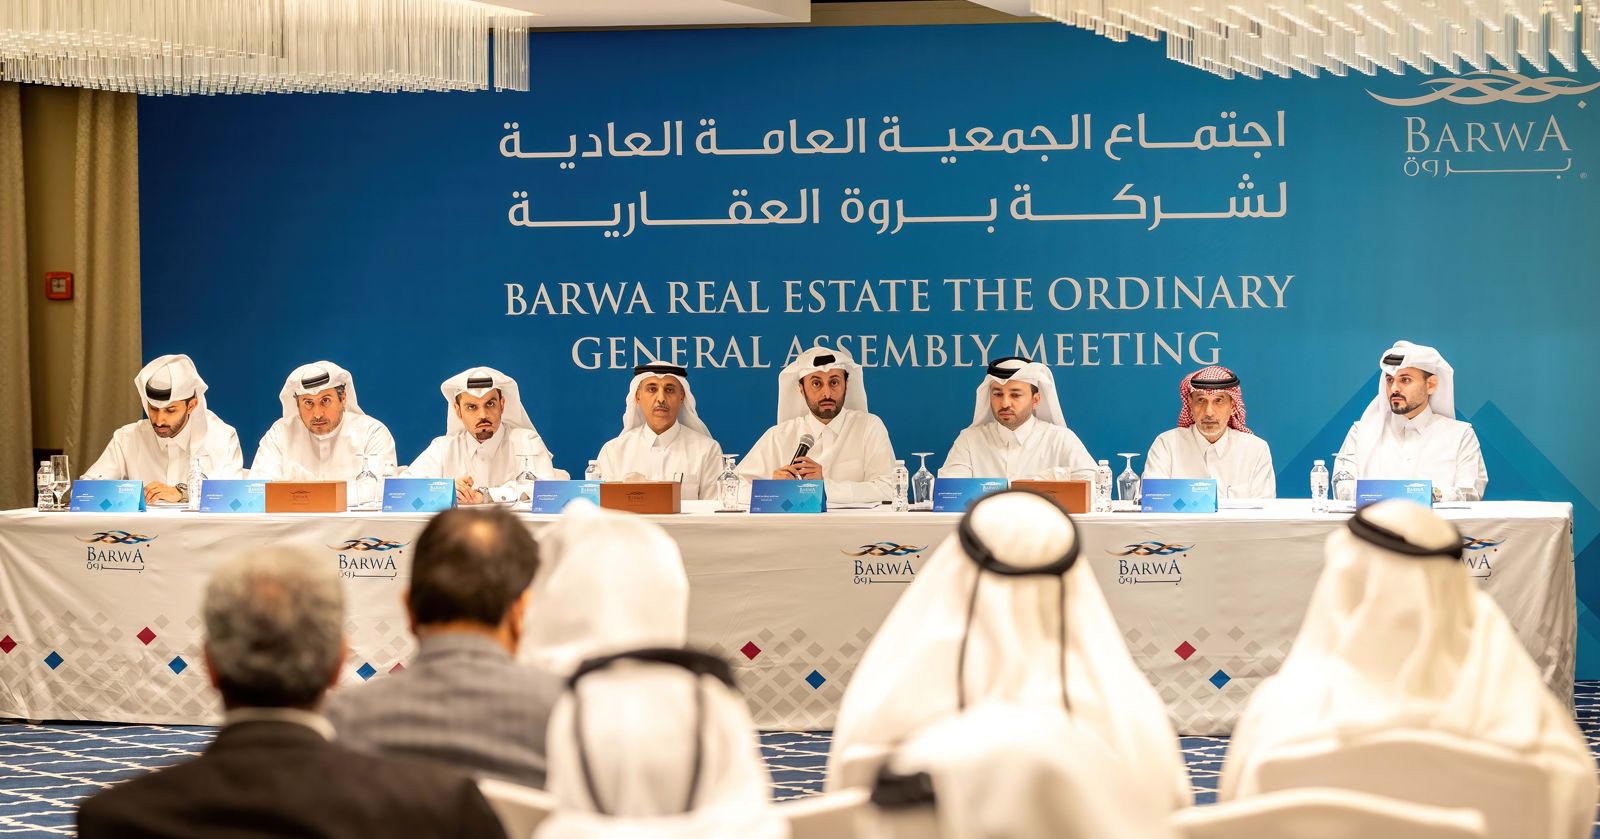 THE ORDINARY GENERAL ASSEMBLY OF BARWA REAL ESTATE APPROVED THE DISTRIBUTION OF CASH DIVIDENDS